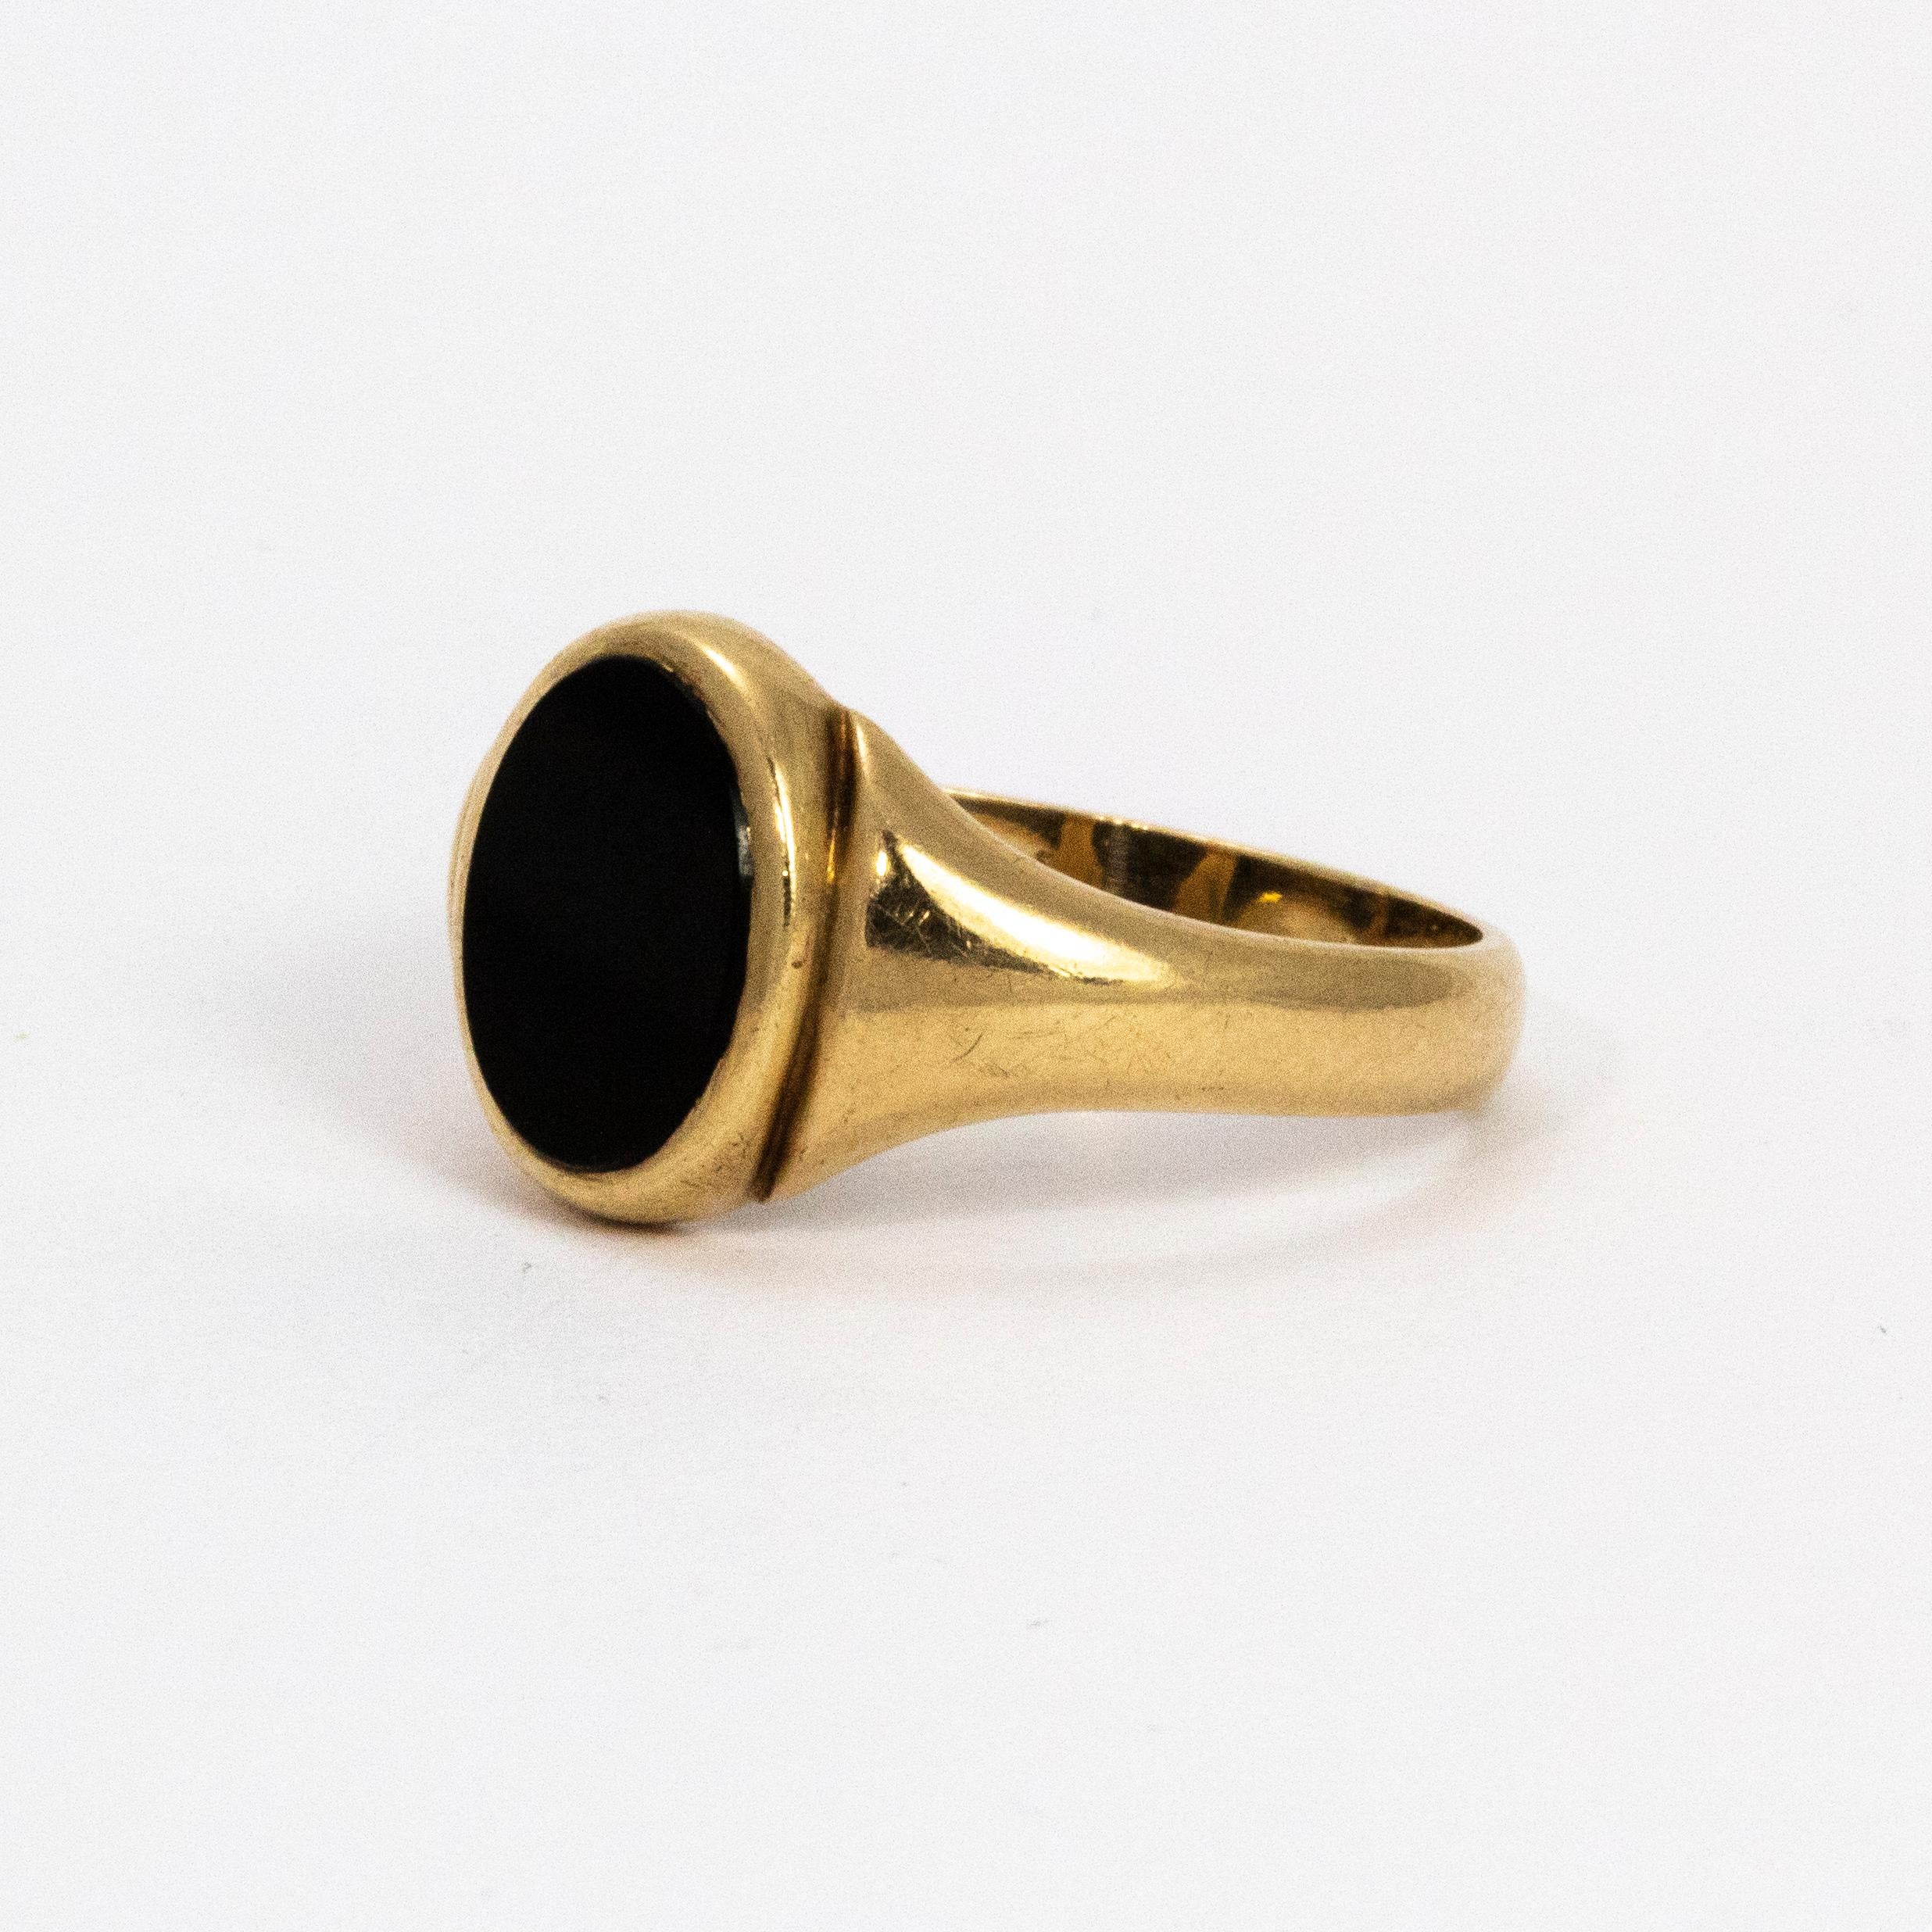 Beautifully simple 9ct gold band with a shiny black onyx.

Ring Size: R or 8 1/2